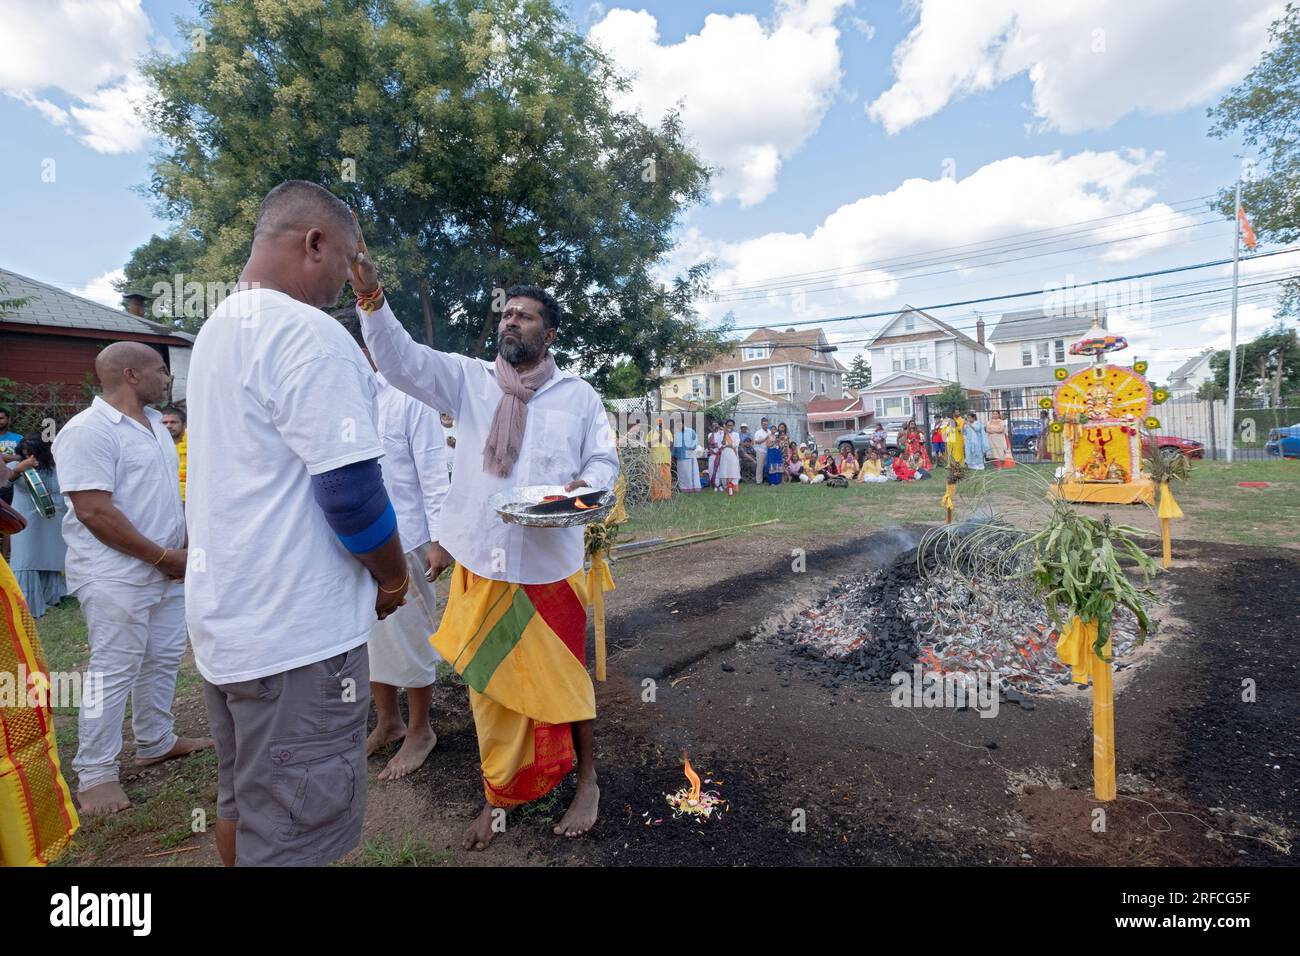 Prior to the fire walking, at the Arya Spiritual Grounds, a priest paints a tilaka on the forehead of a devout worshiper. In Jamaica, Queens, New York. Stock Photo